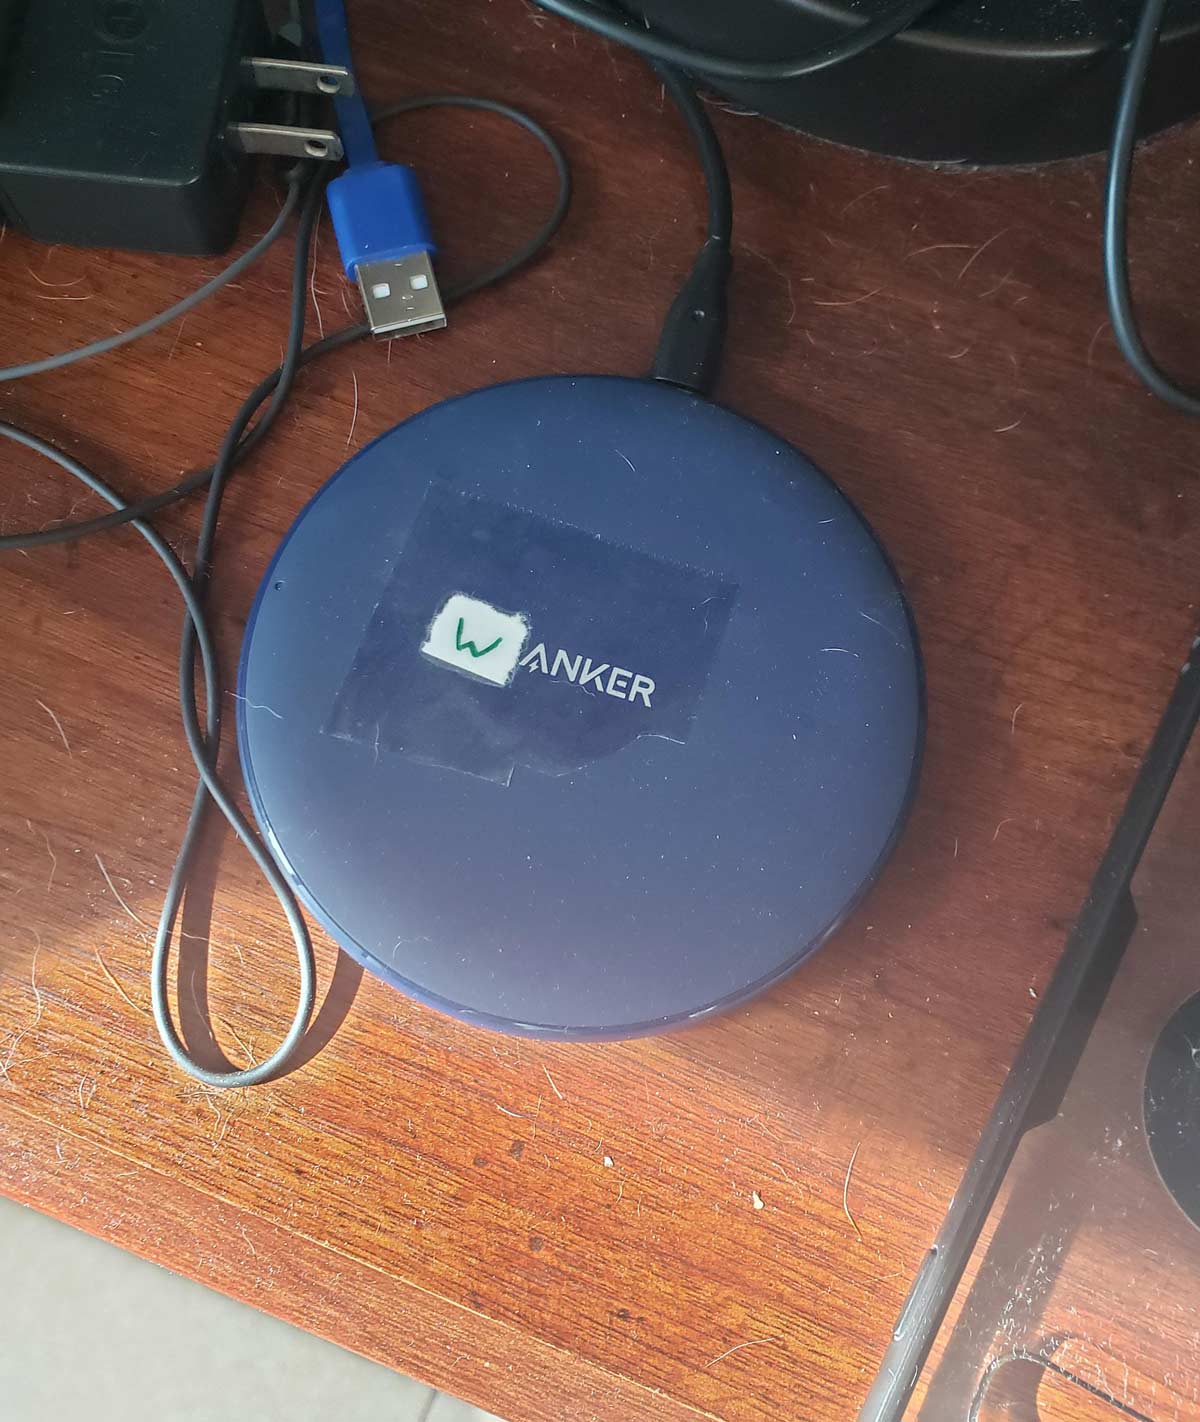 This how my husband decided to modify his wireless charging station